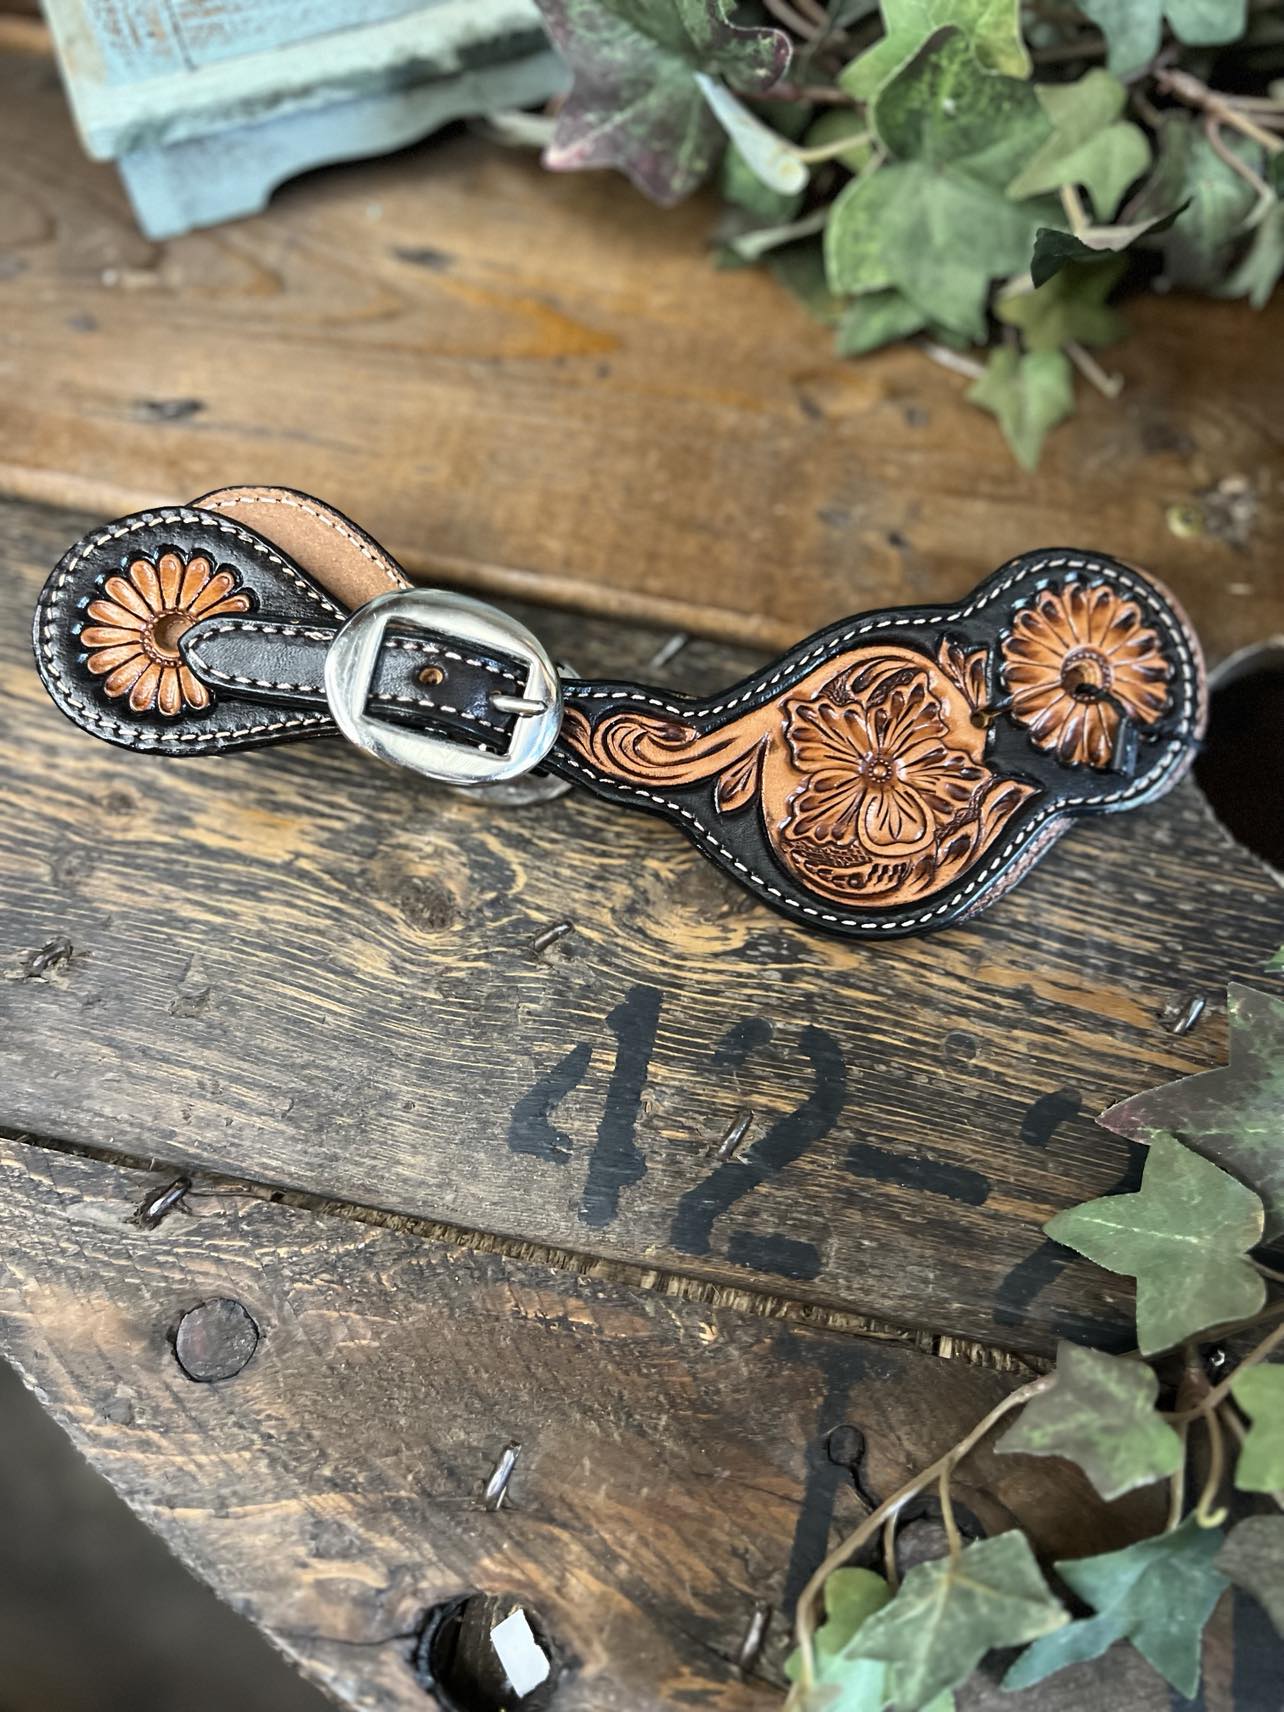 3P9023-Professional Choice Spur Strap-Spur Straps-Professionals Choice-Lucky J Boots & More, Women's, Men's, & Kids Western Store Located in Carthage, MO